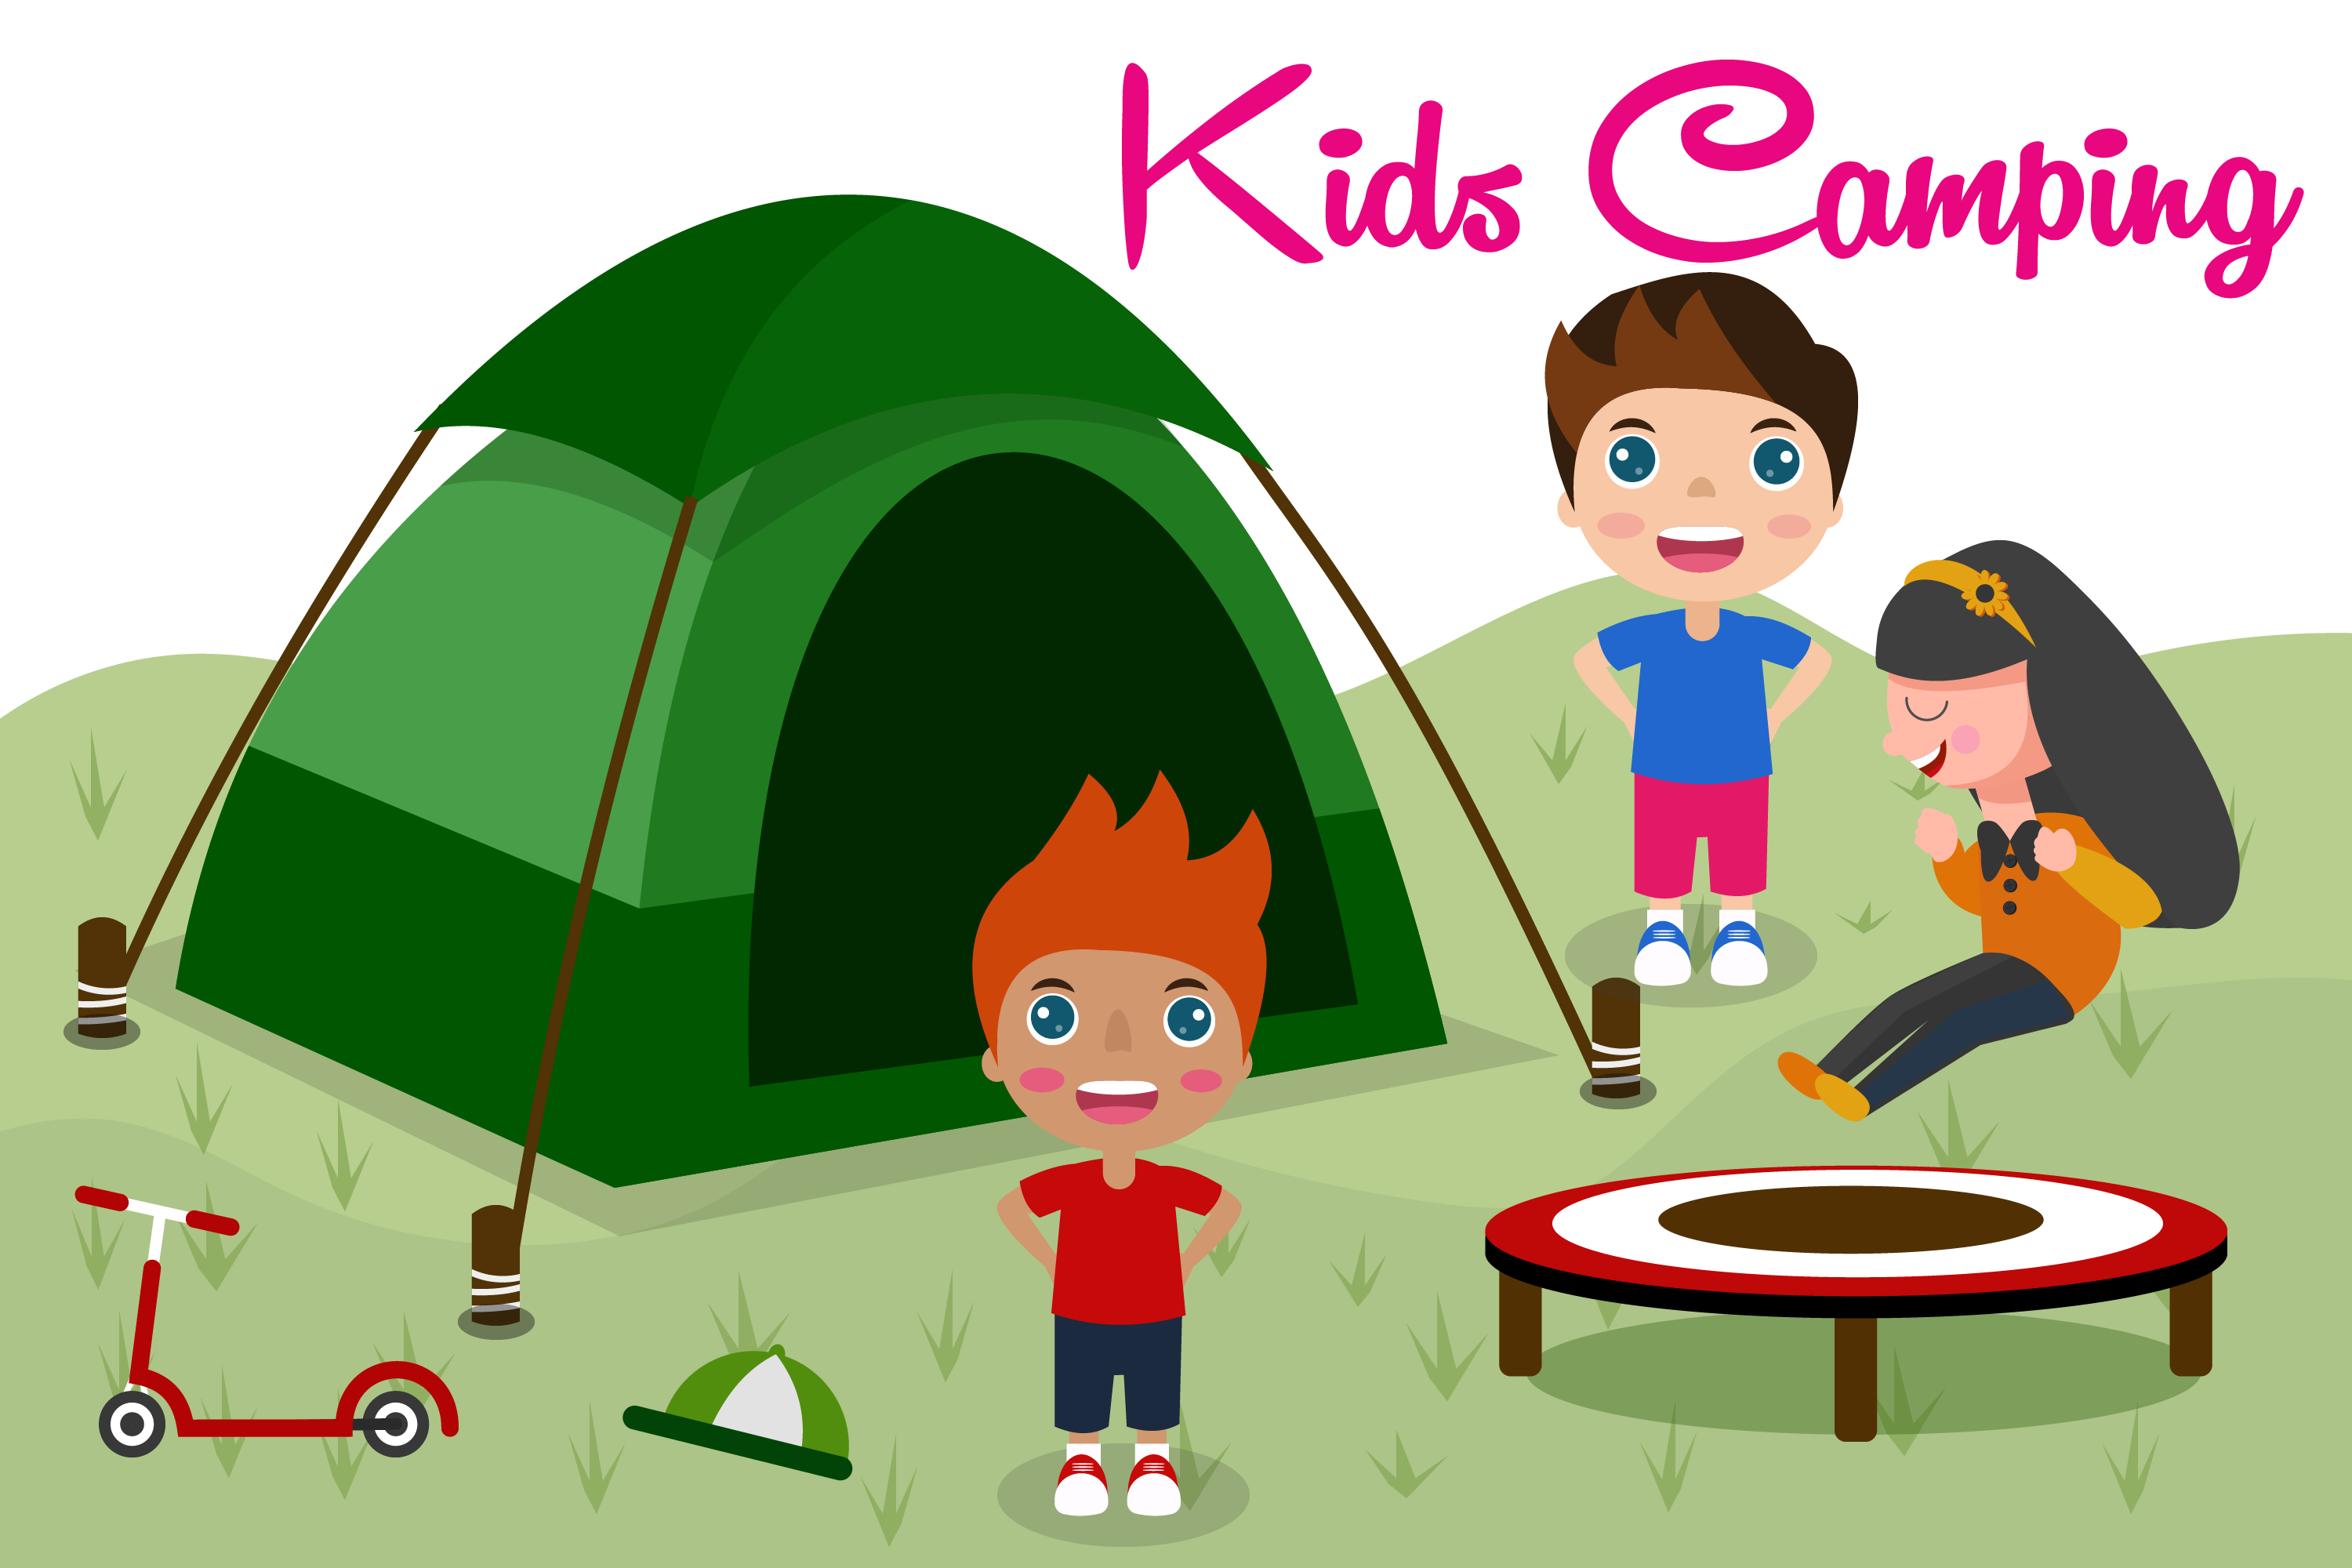 Camping illustration. Camping for kids